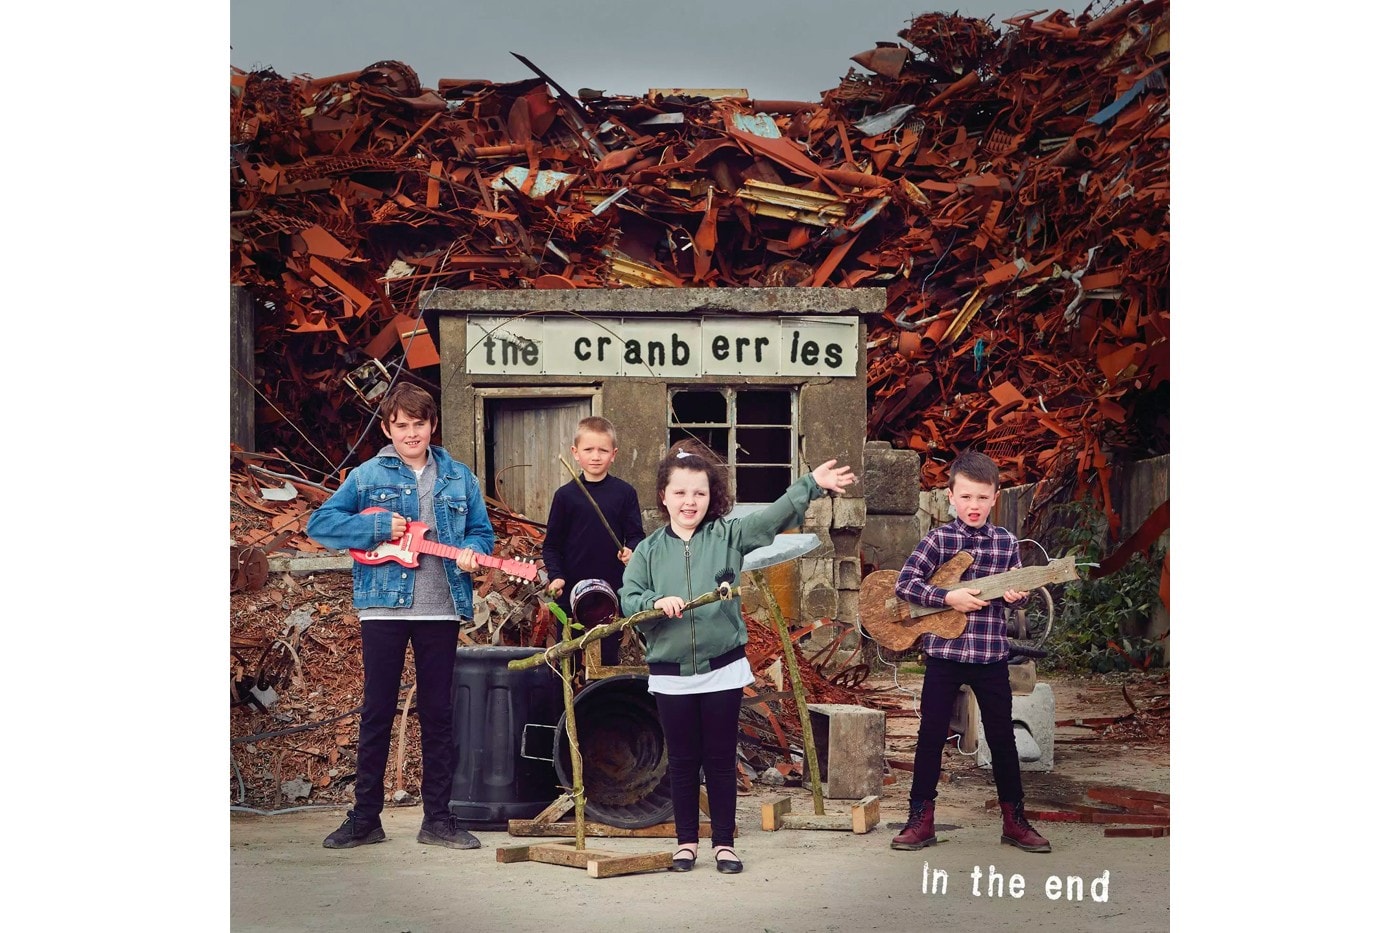 The Cranberries 發布告別歌曲《In the End》致敬主唱 Dolores O'Riordan